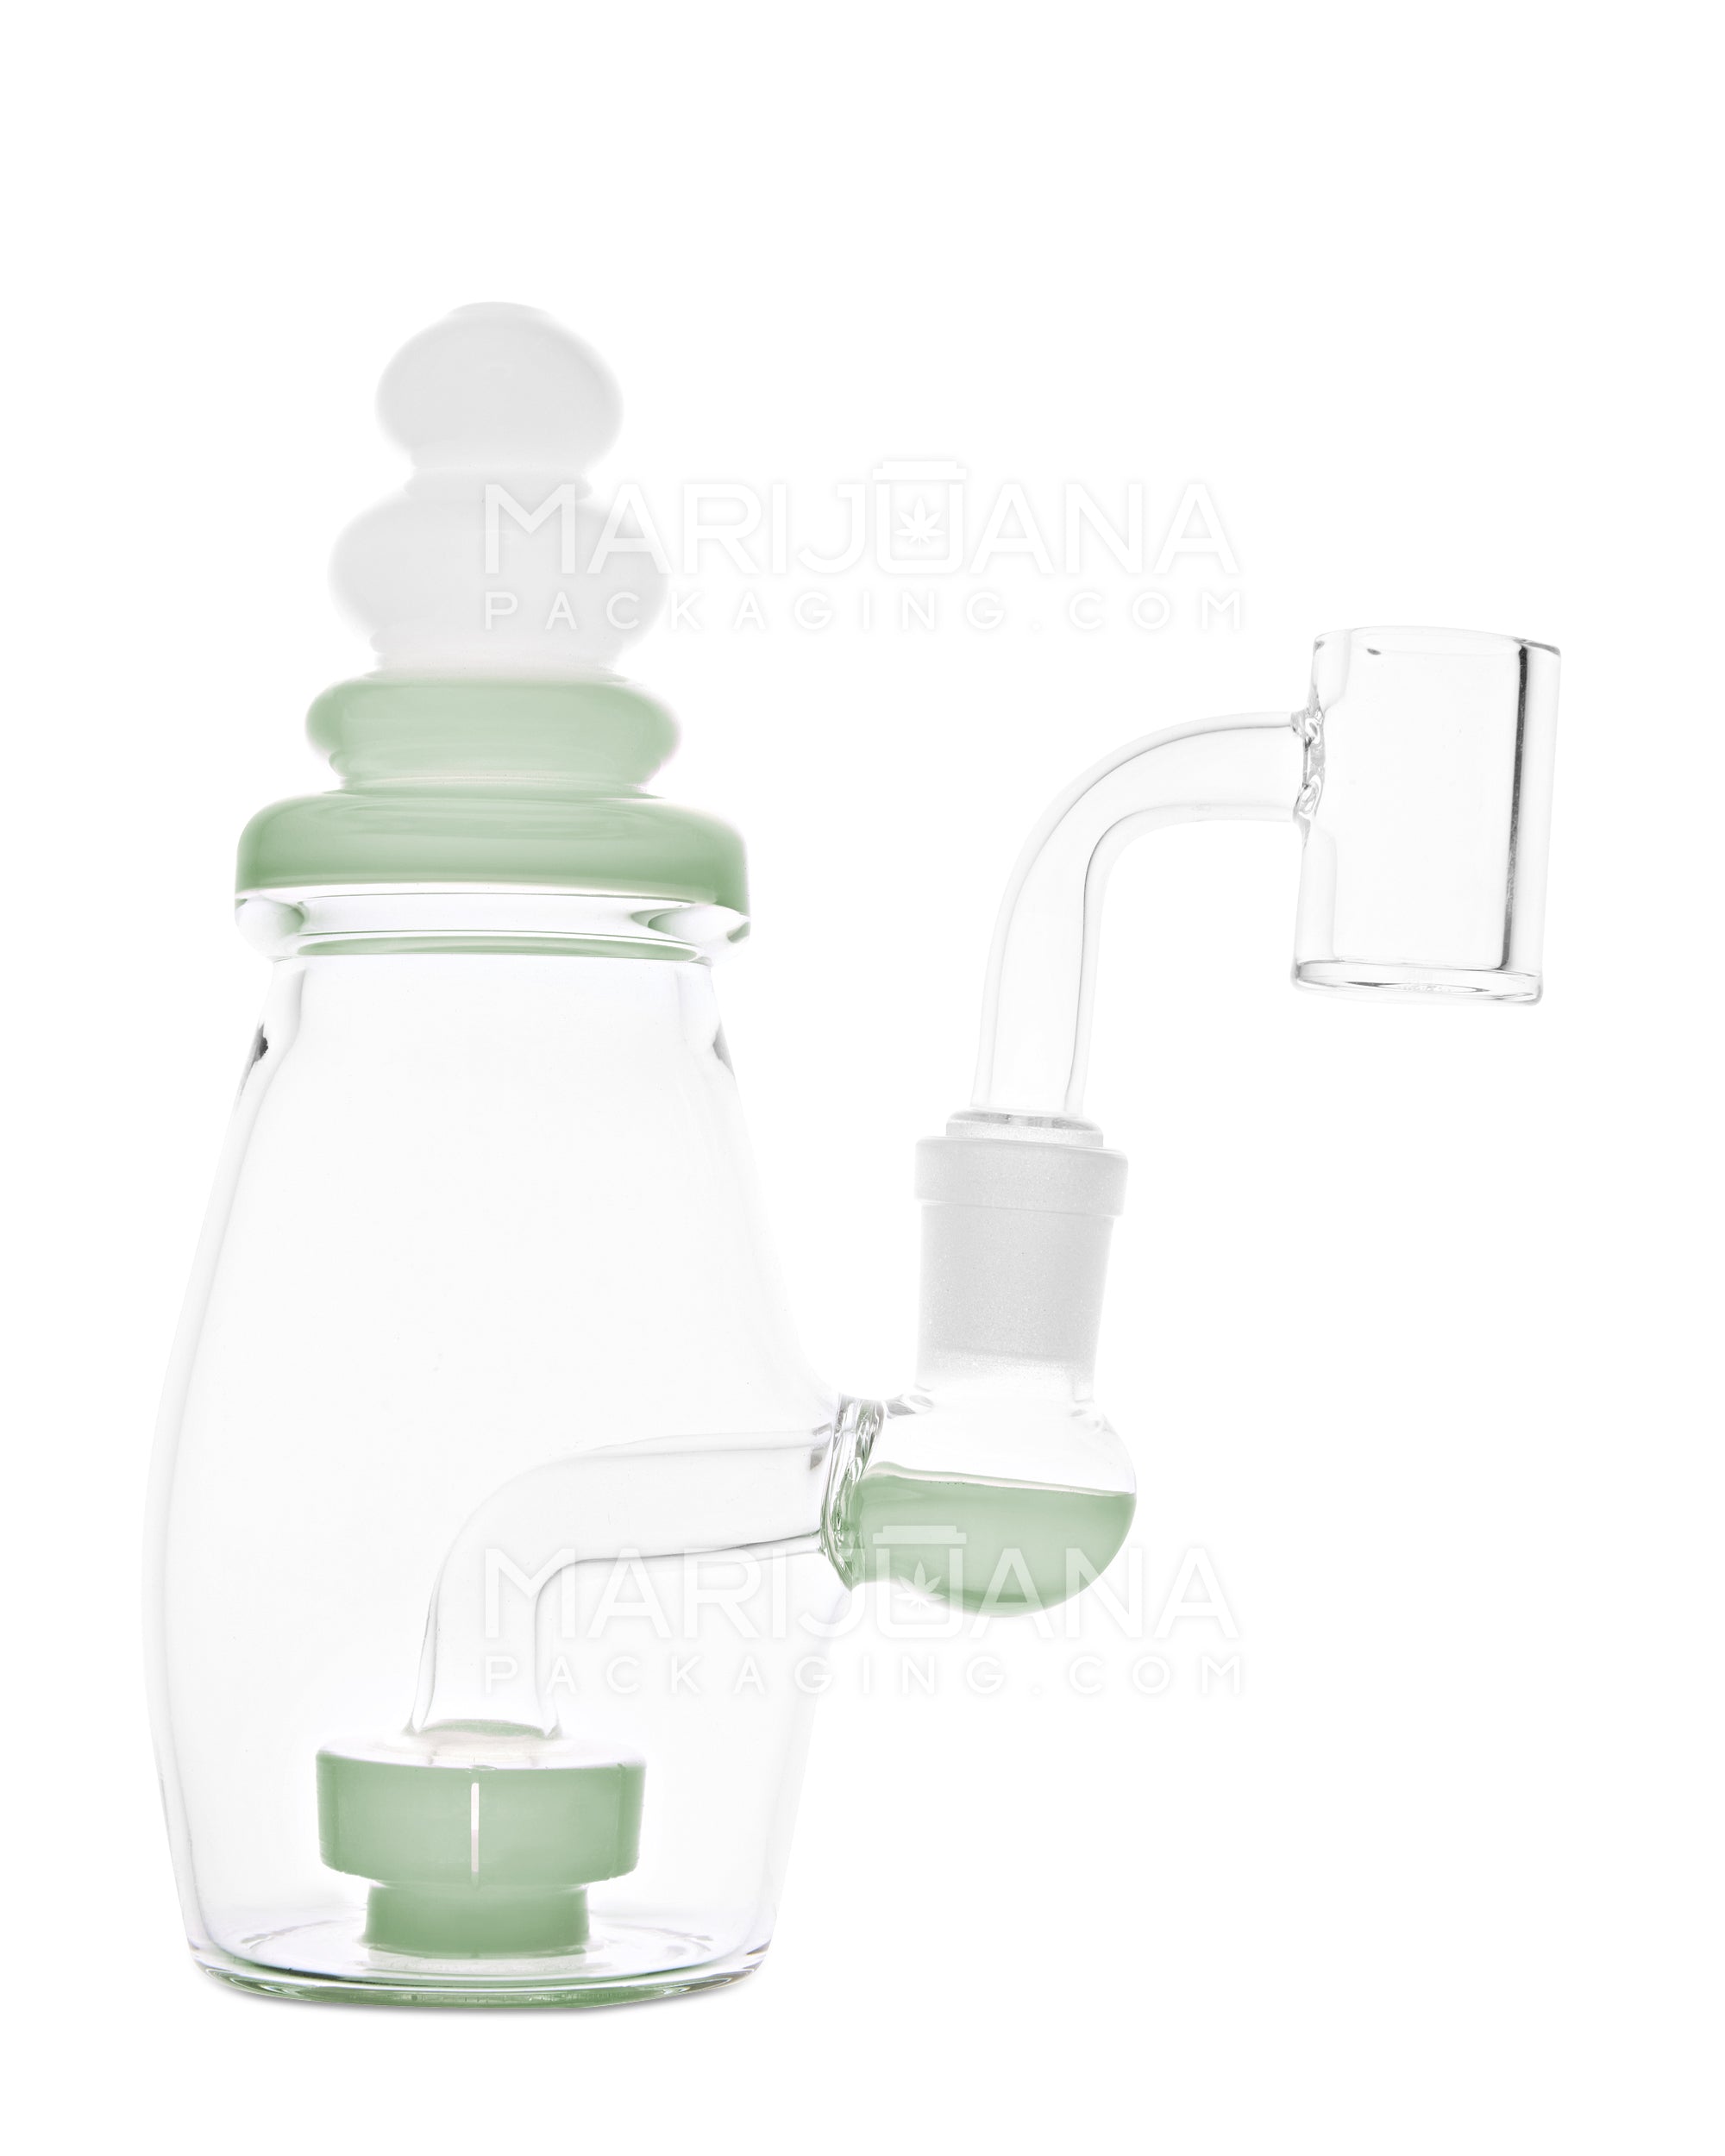 USA Glass | Straight Neck Baby Bottle Water Pipe w/ Showerhead Percolator | 6in Tall - 14mm Bowl - Green